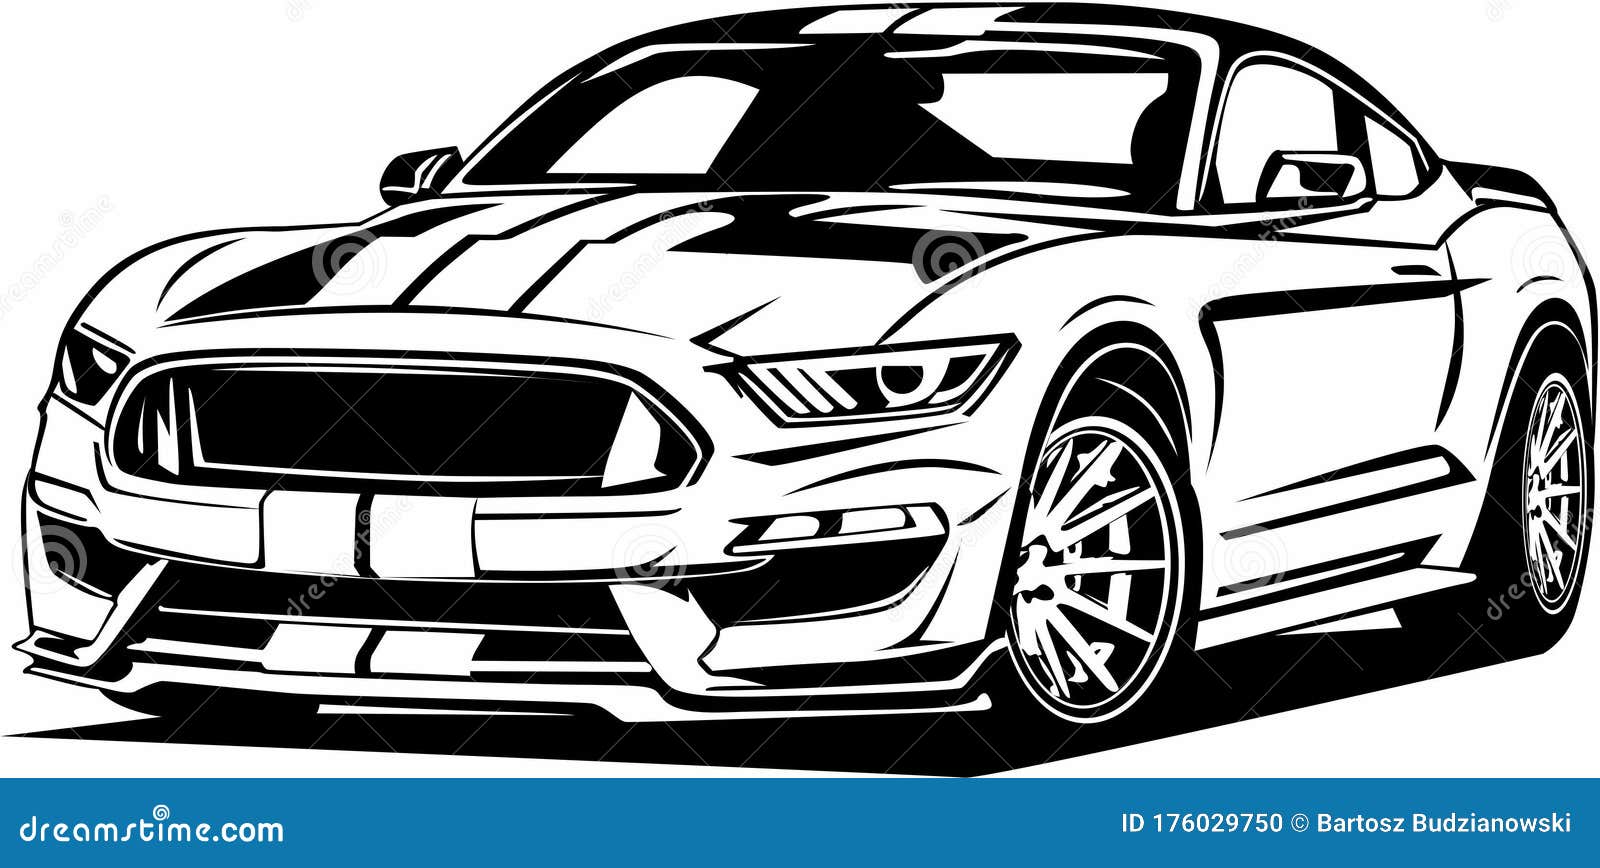 Ford Mustang 2013 Vector File | lupon.gov.ph